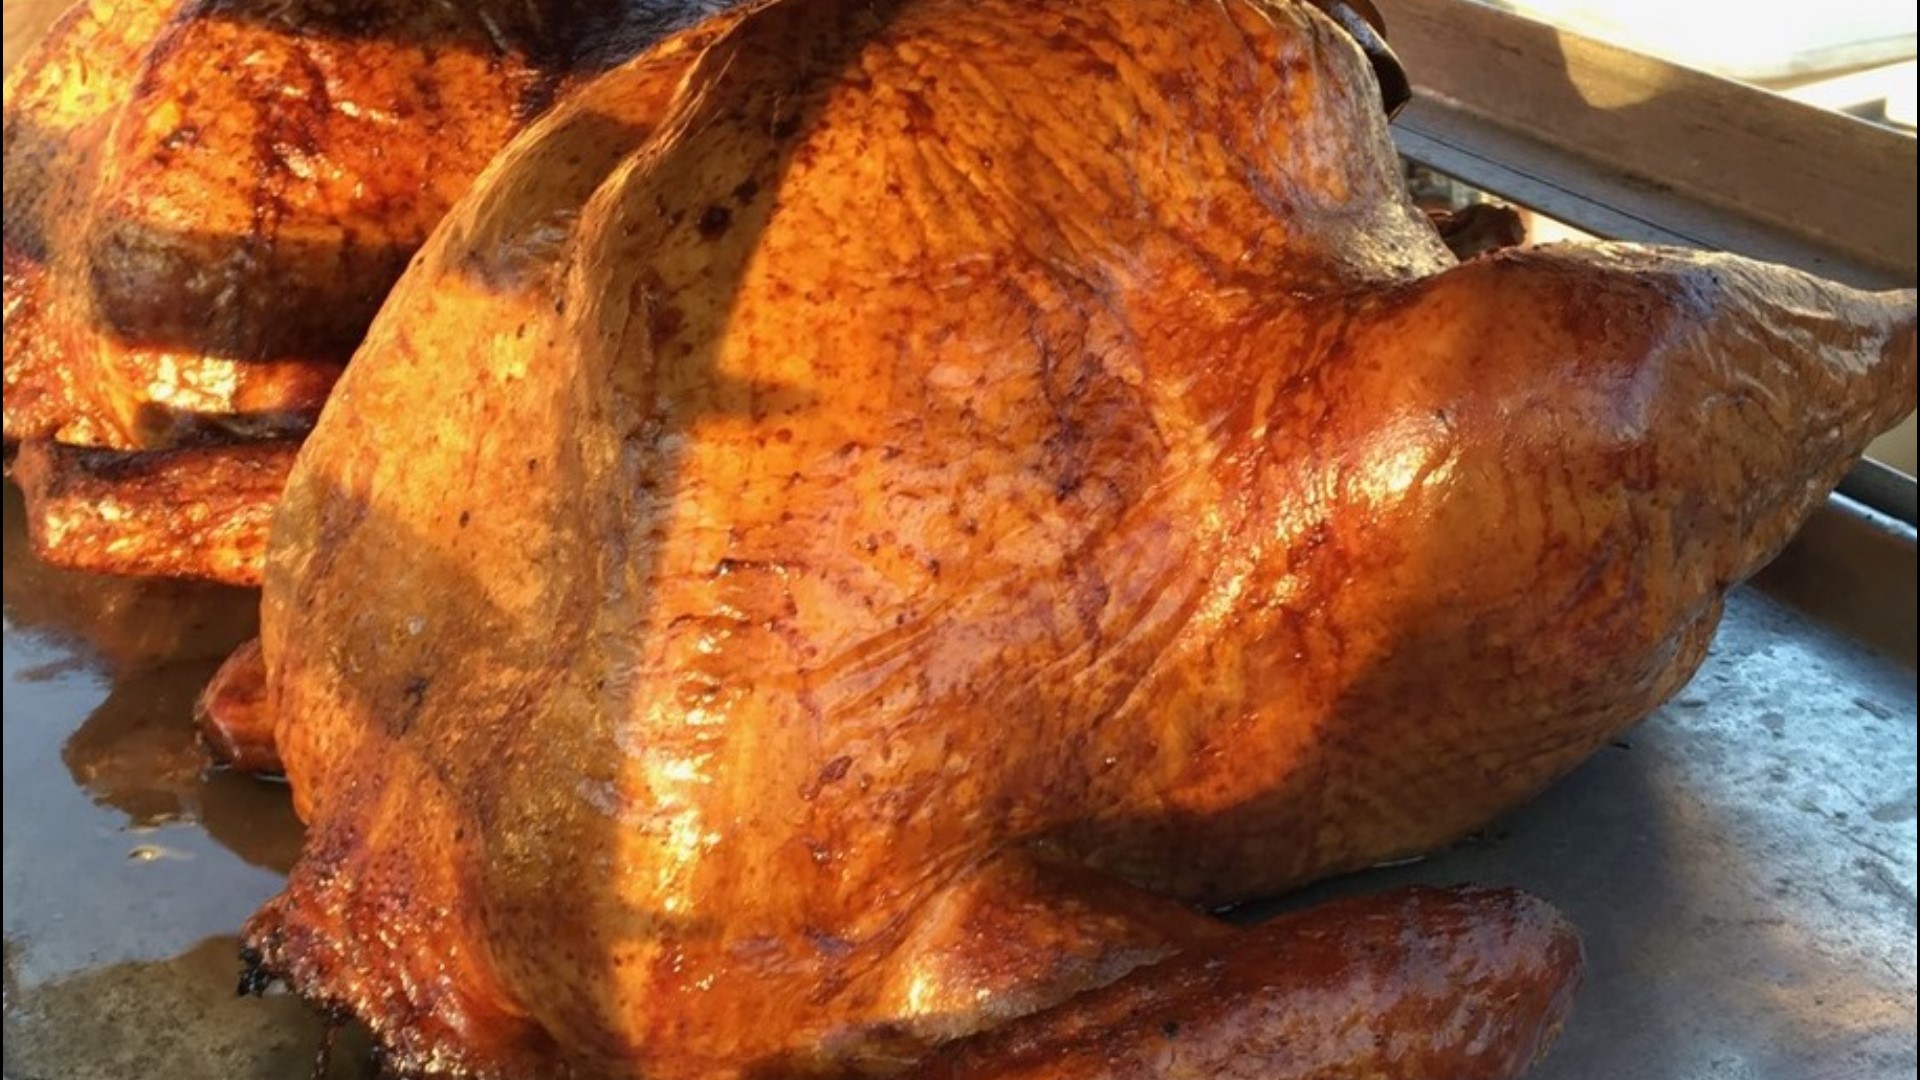 Need help figuring out what to do with your turkey? WFAA's Tashara Parker got tips from Butterball's Turkey Talk-Line.